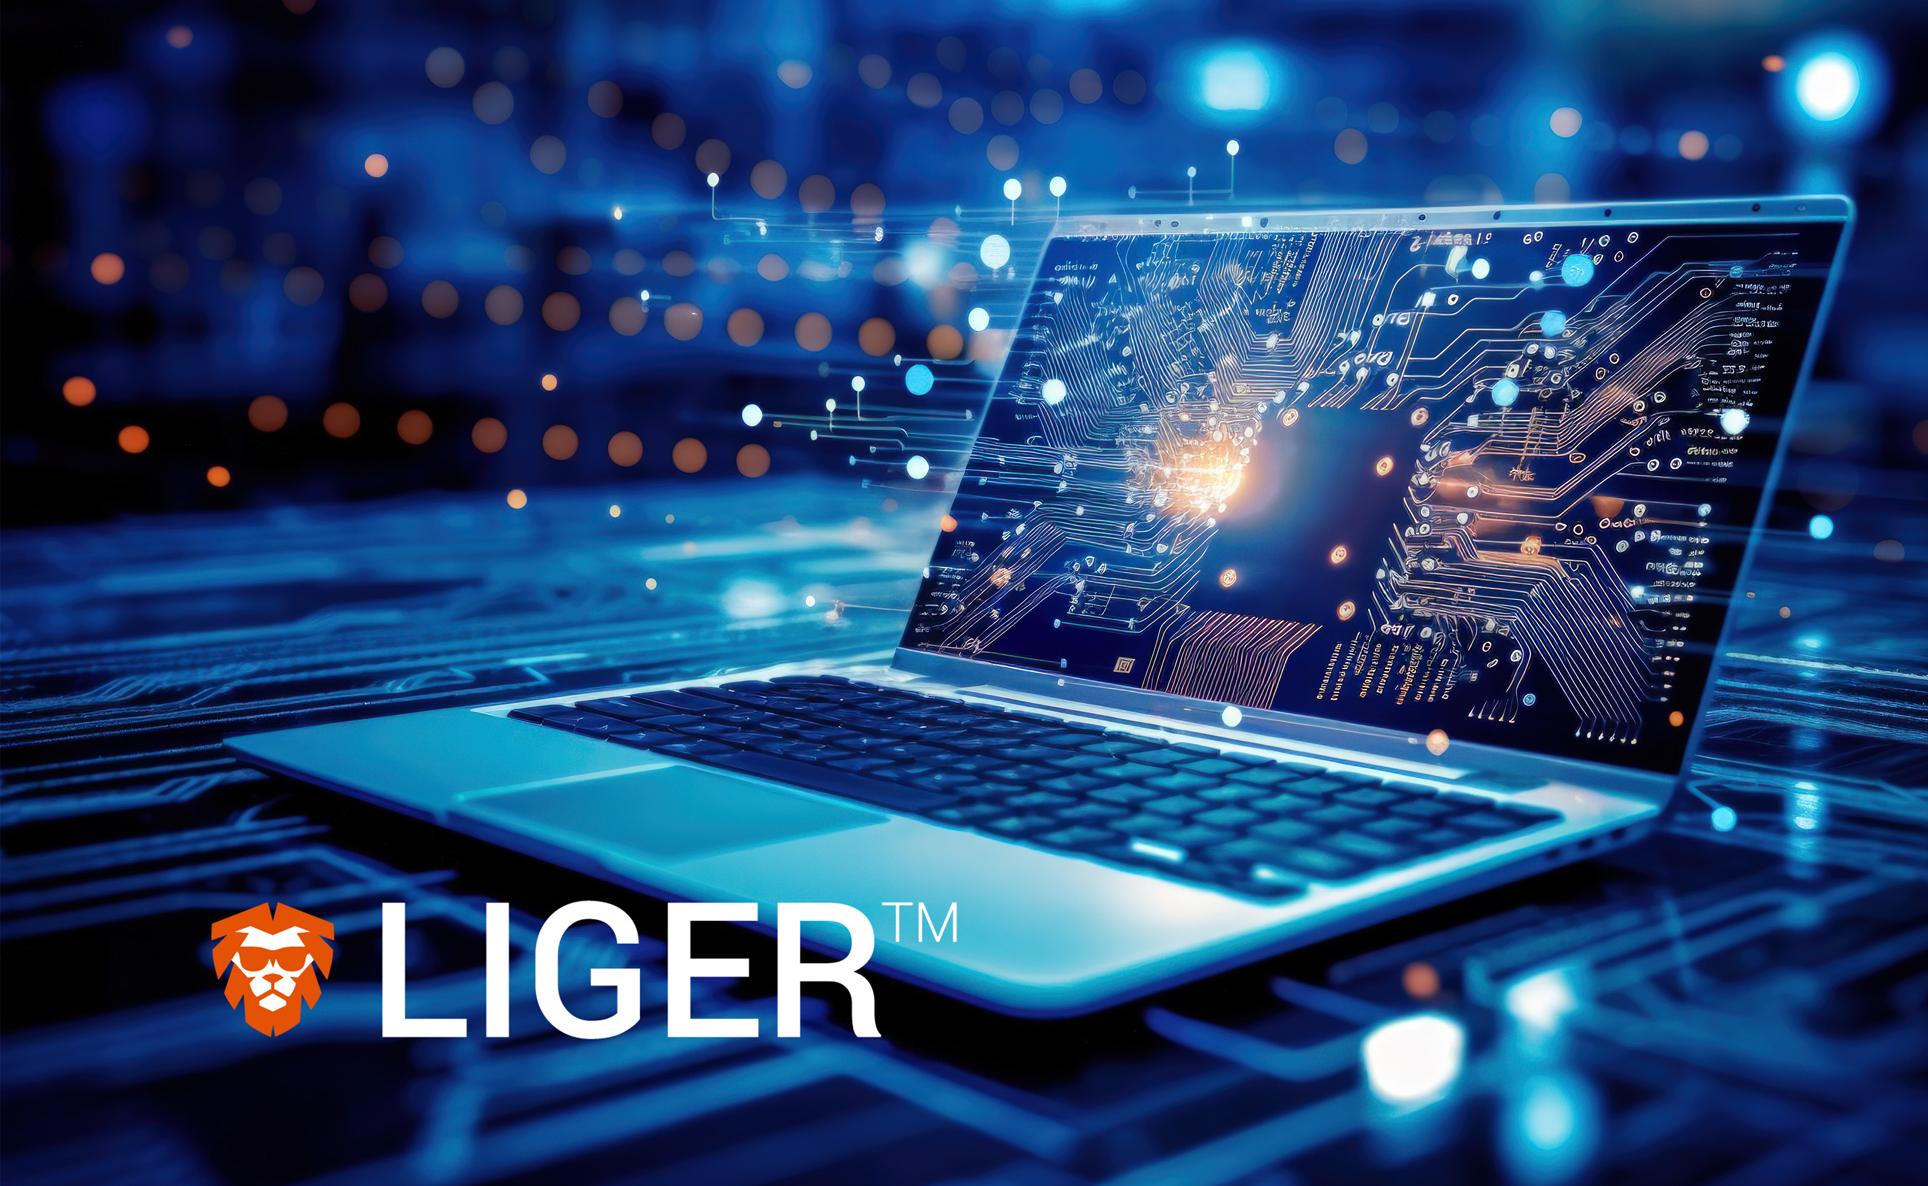 LIGER trademarked logo over an image of a laptop